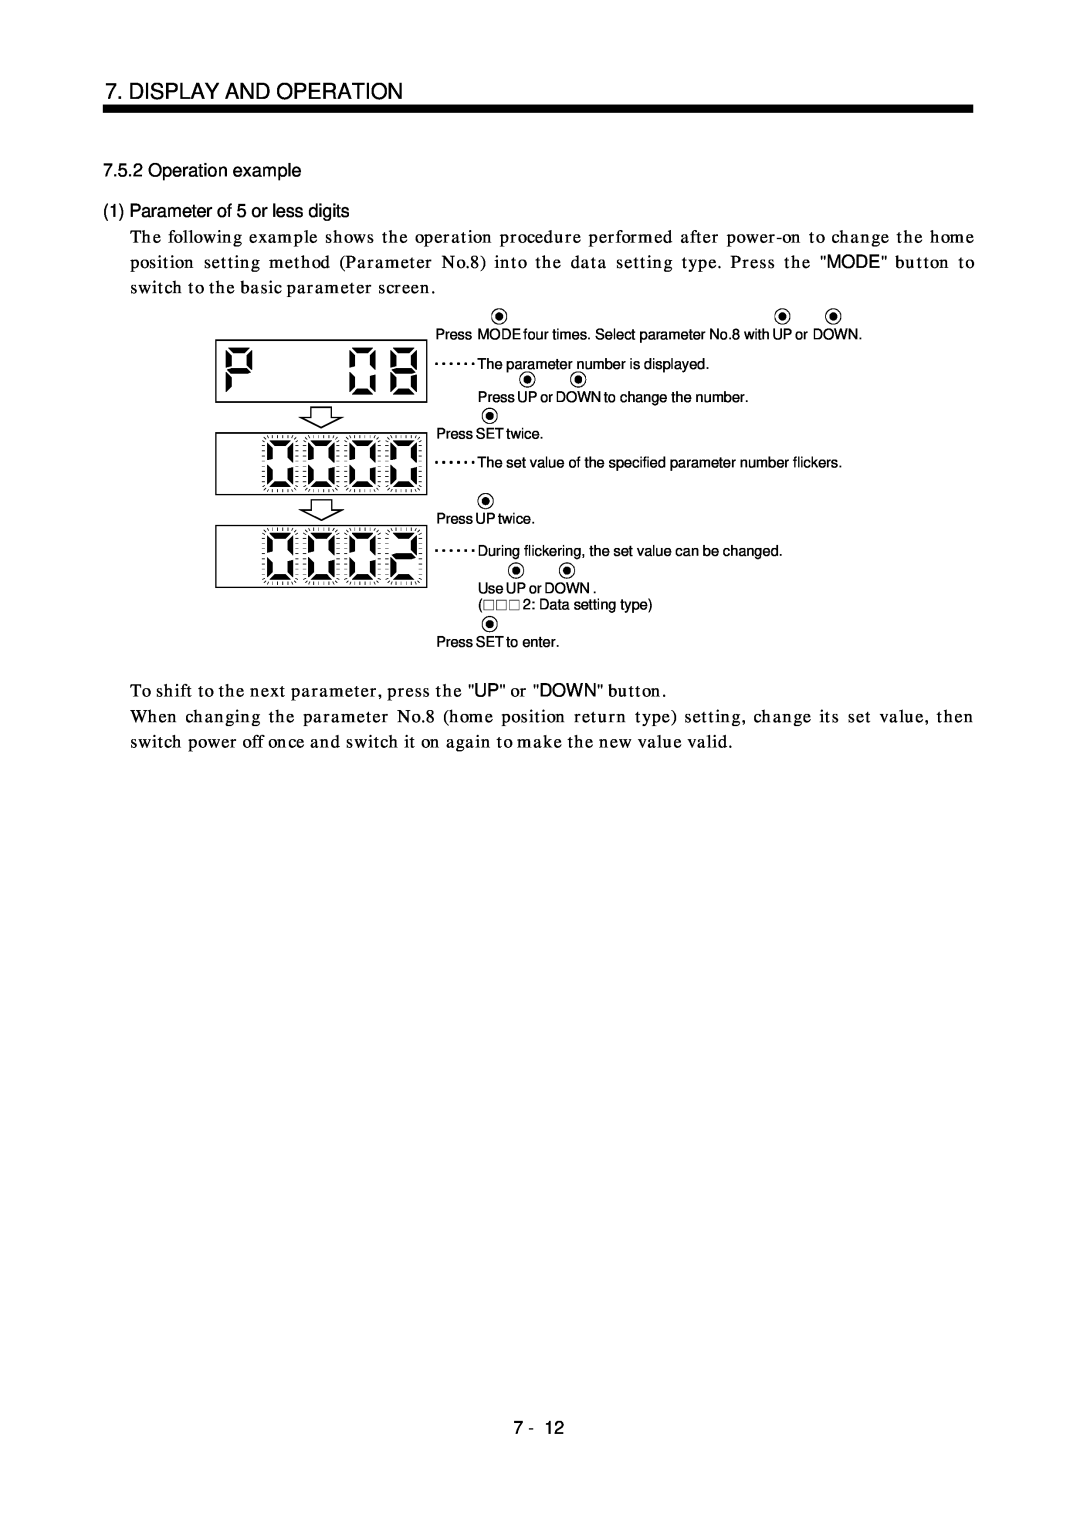 Mitsubishi Electronics MR-J2S- CL specifications Operation example, 1Parameter of 5 or less digits, Display And Operation 